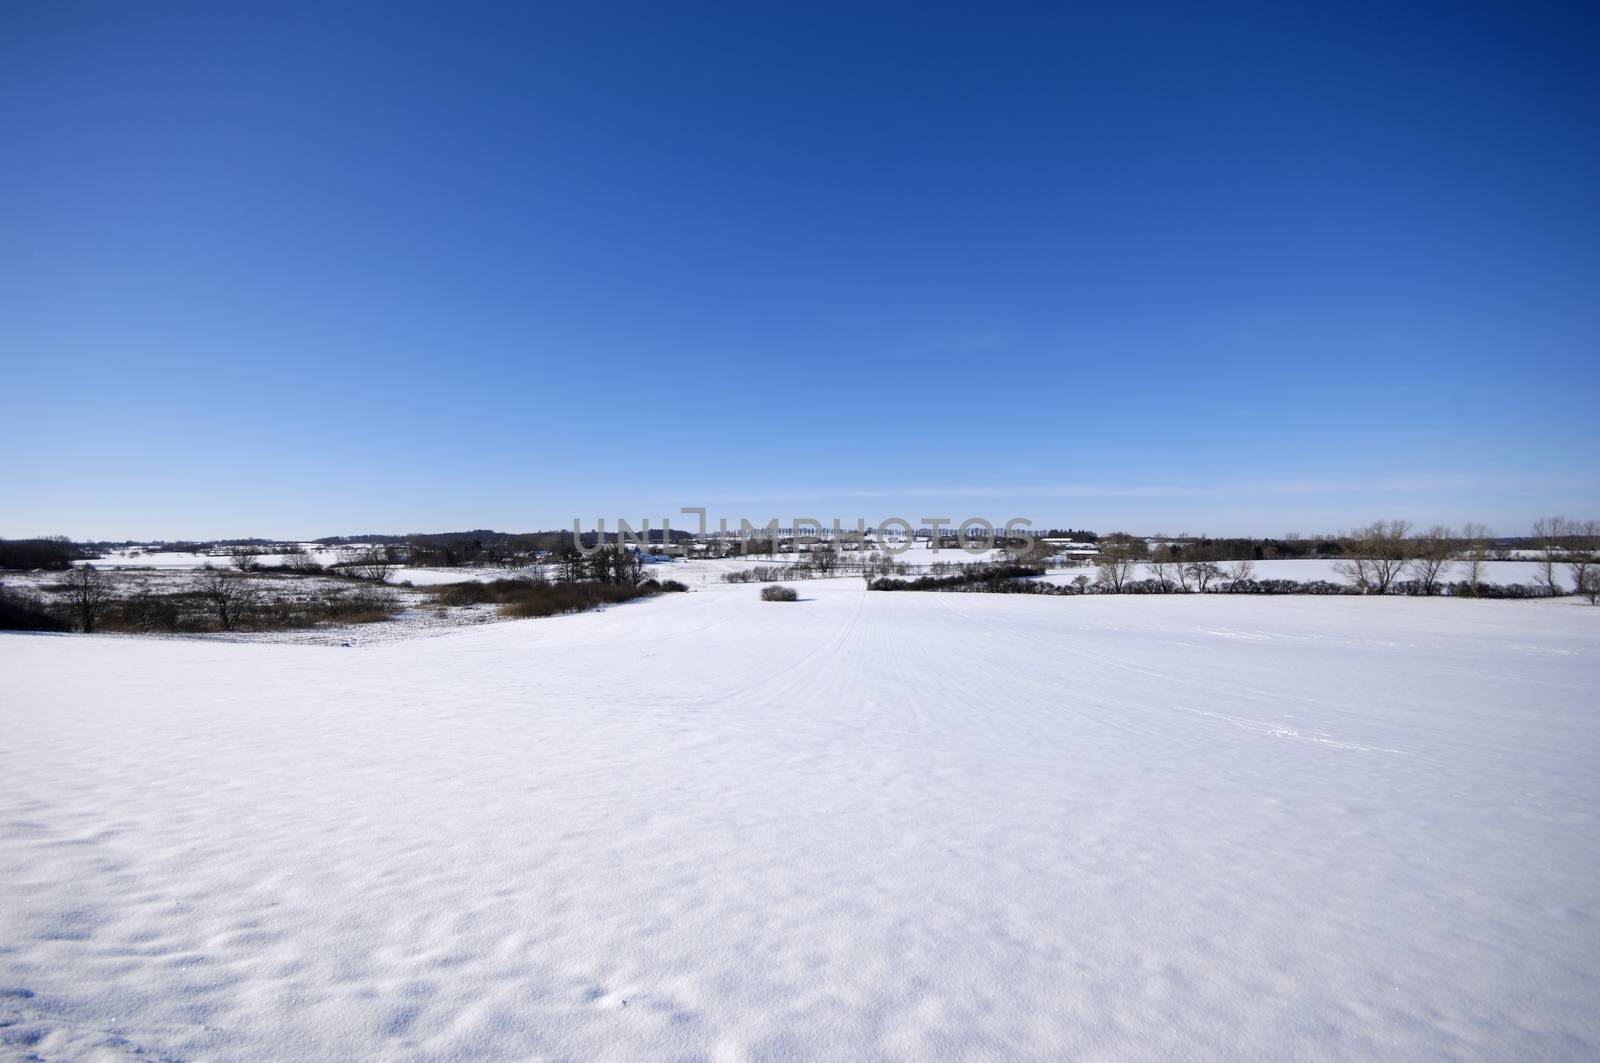 Landscape at winter. The ground is covered with snow.